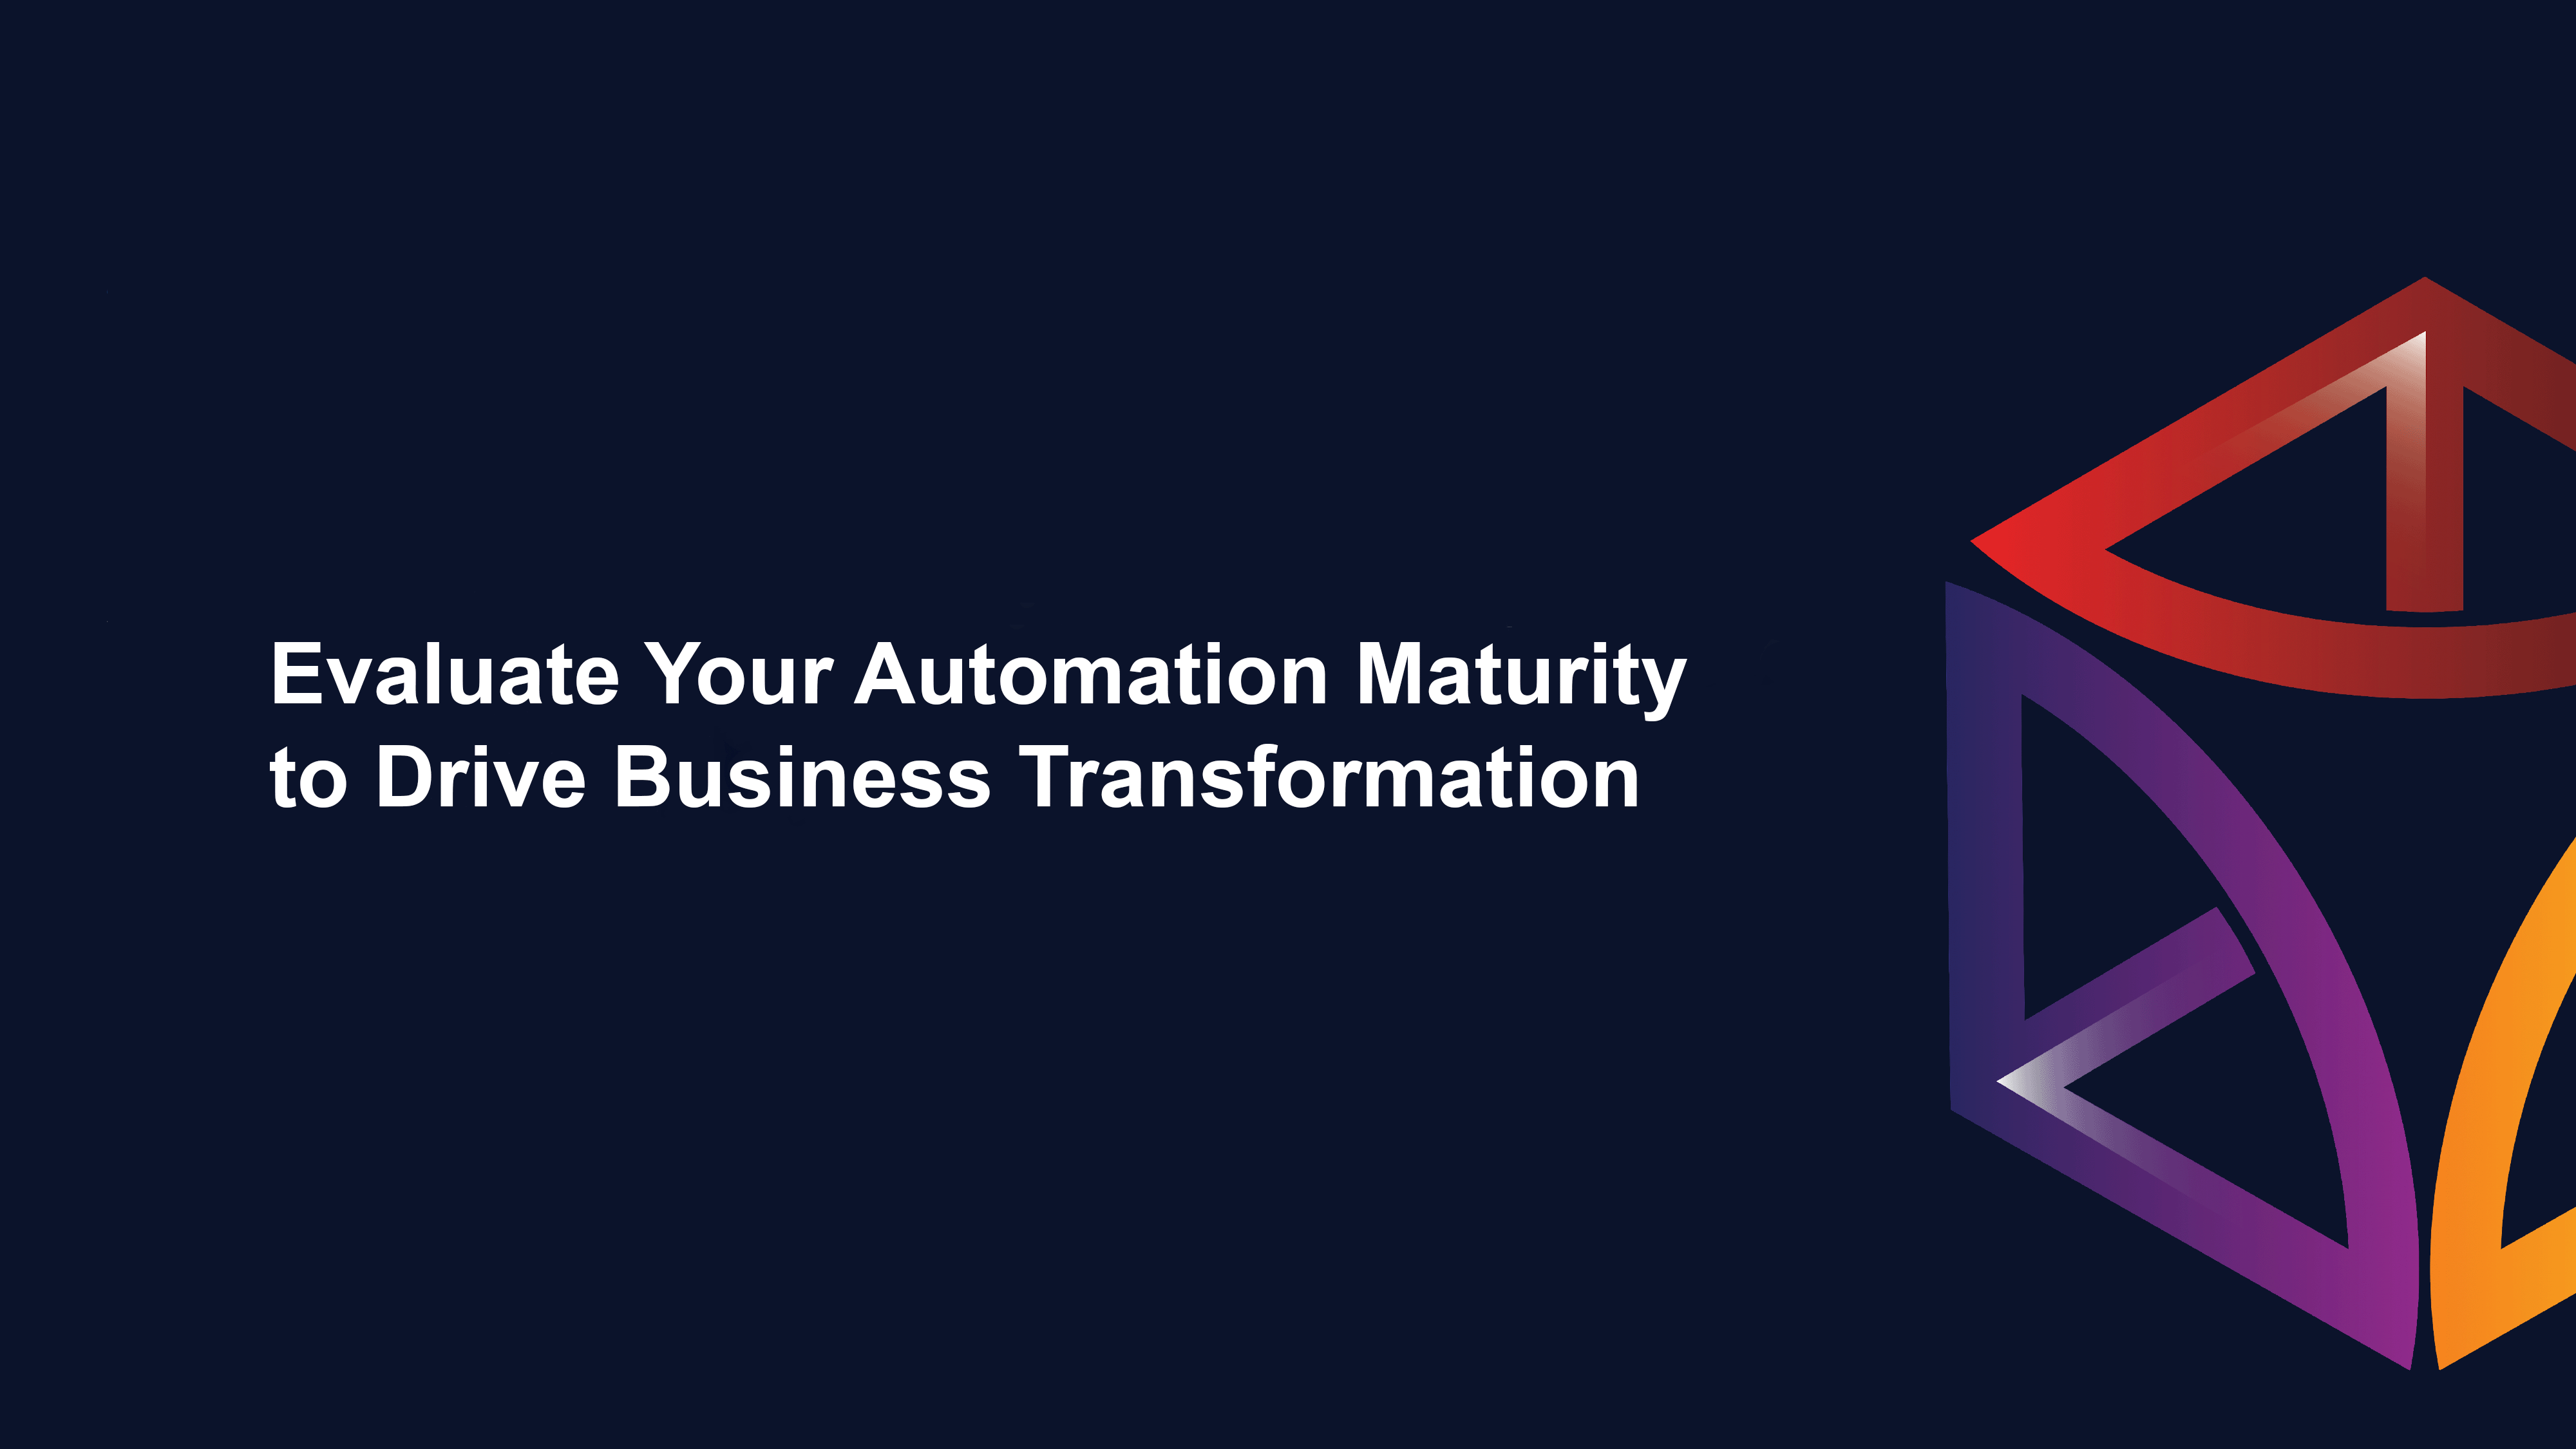 Evaluate Your Automation Maturity